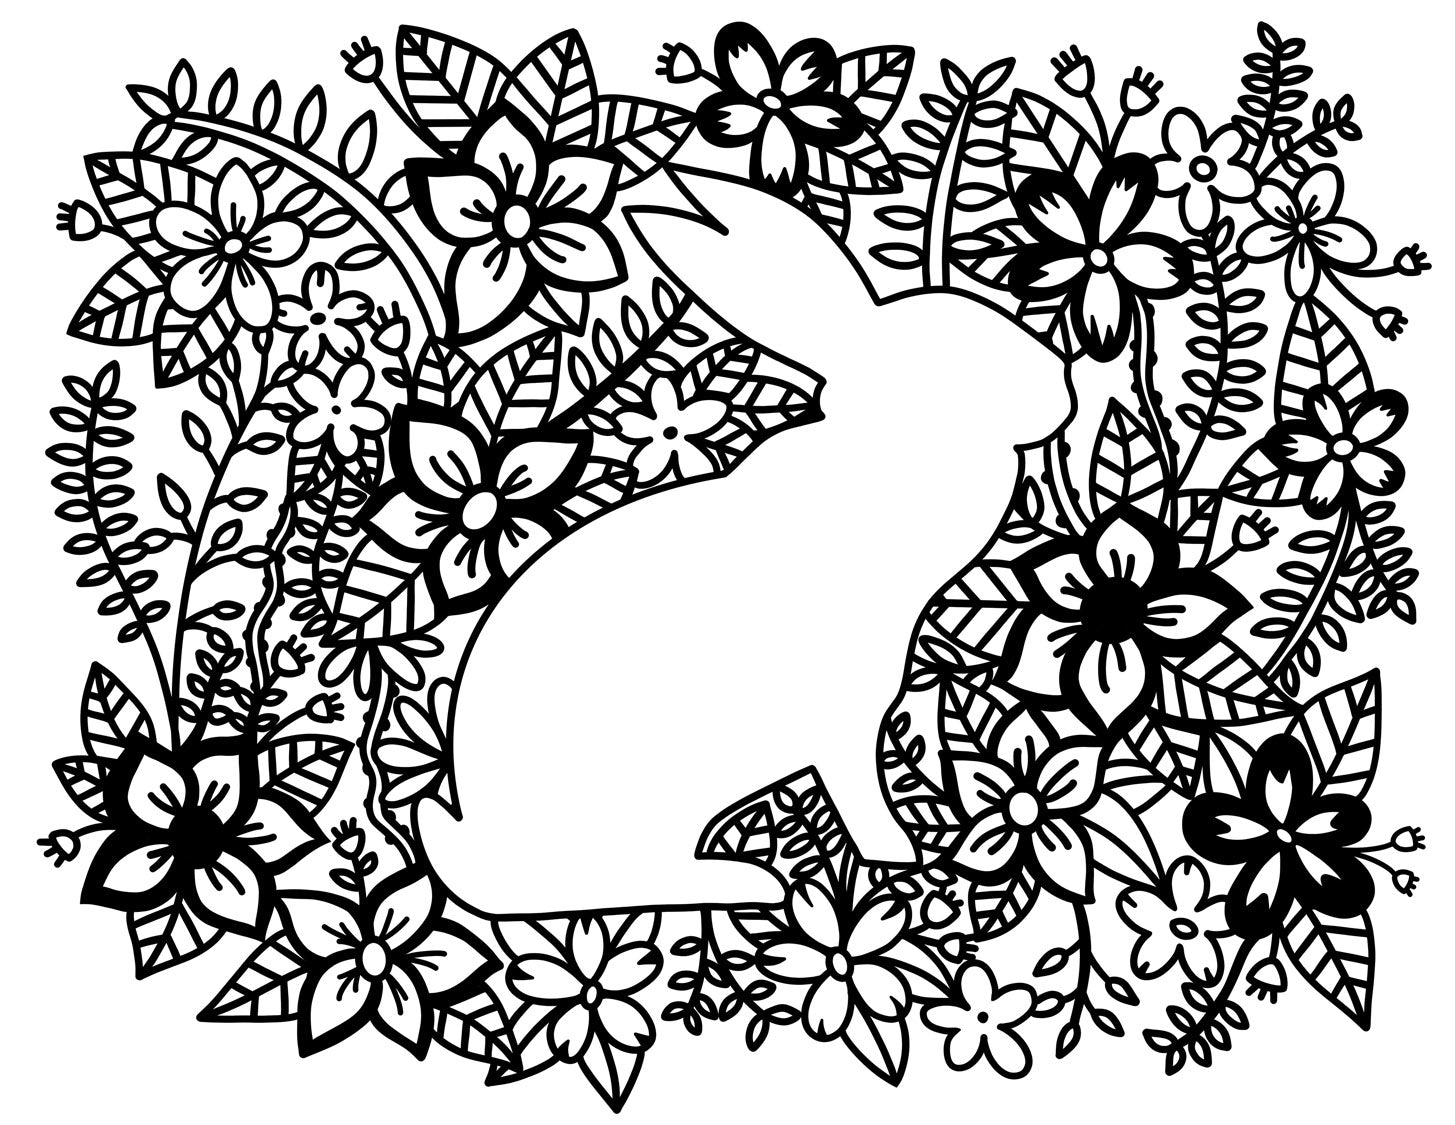 Colouring Pages For Rabbit / Coloring Pages Rabbit Free Download Ta Muchly - Select from 35919 printable crafts of cartoons, nature, animals, bible and many more.